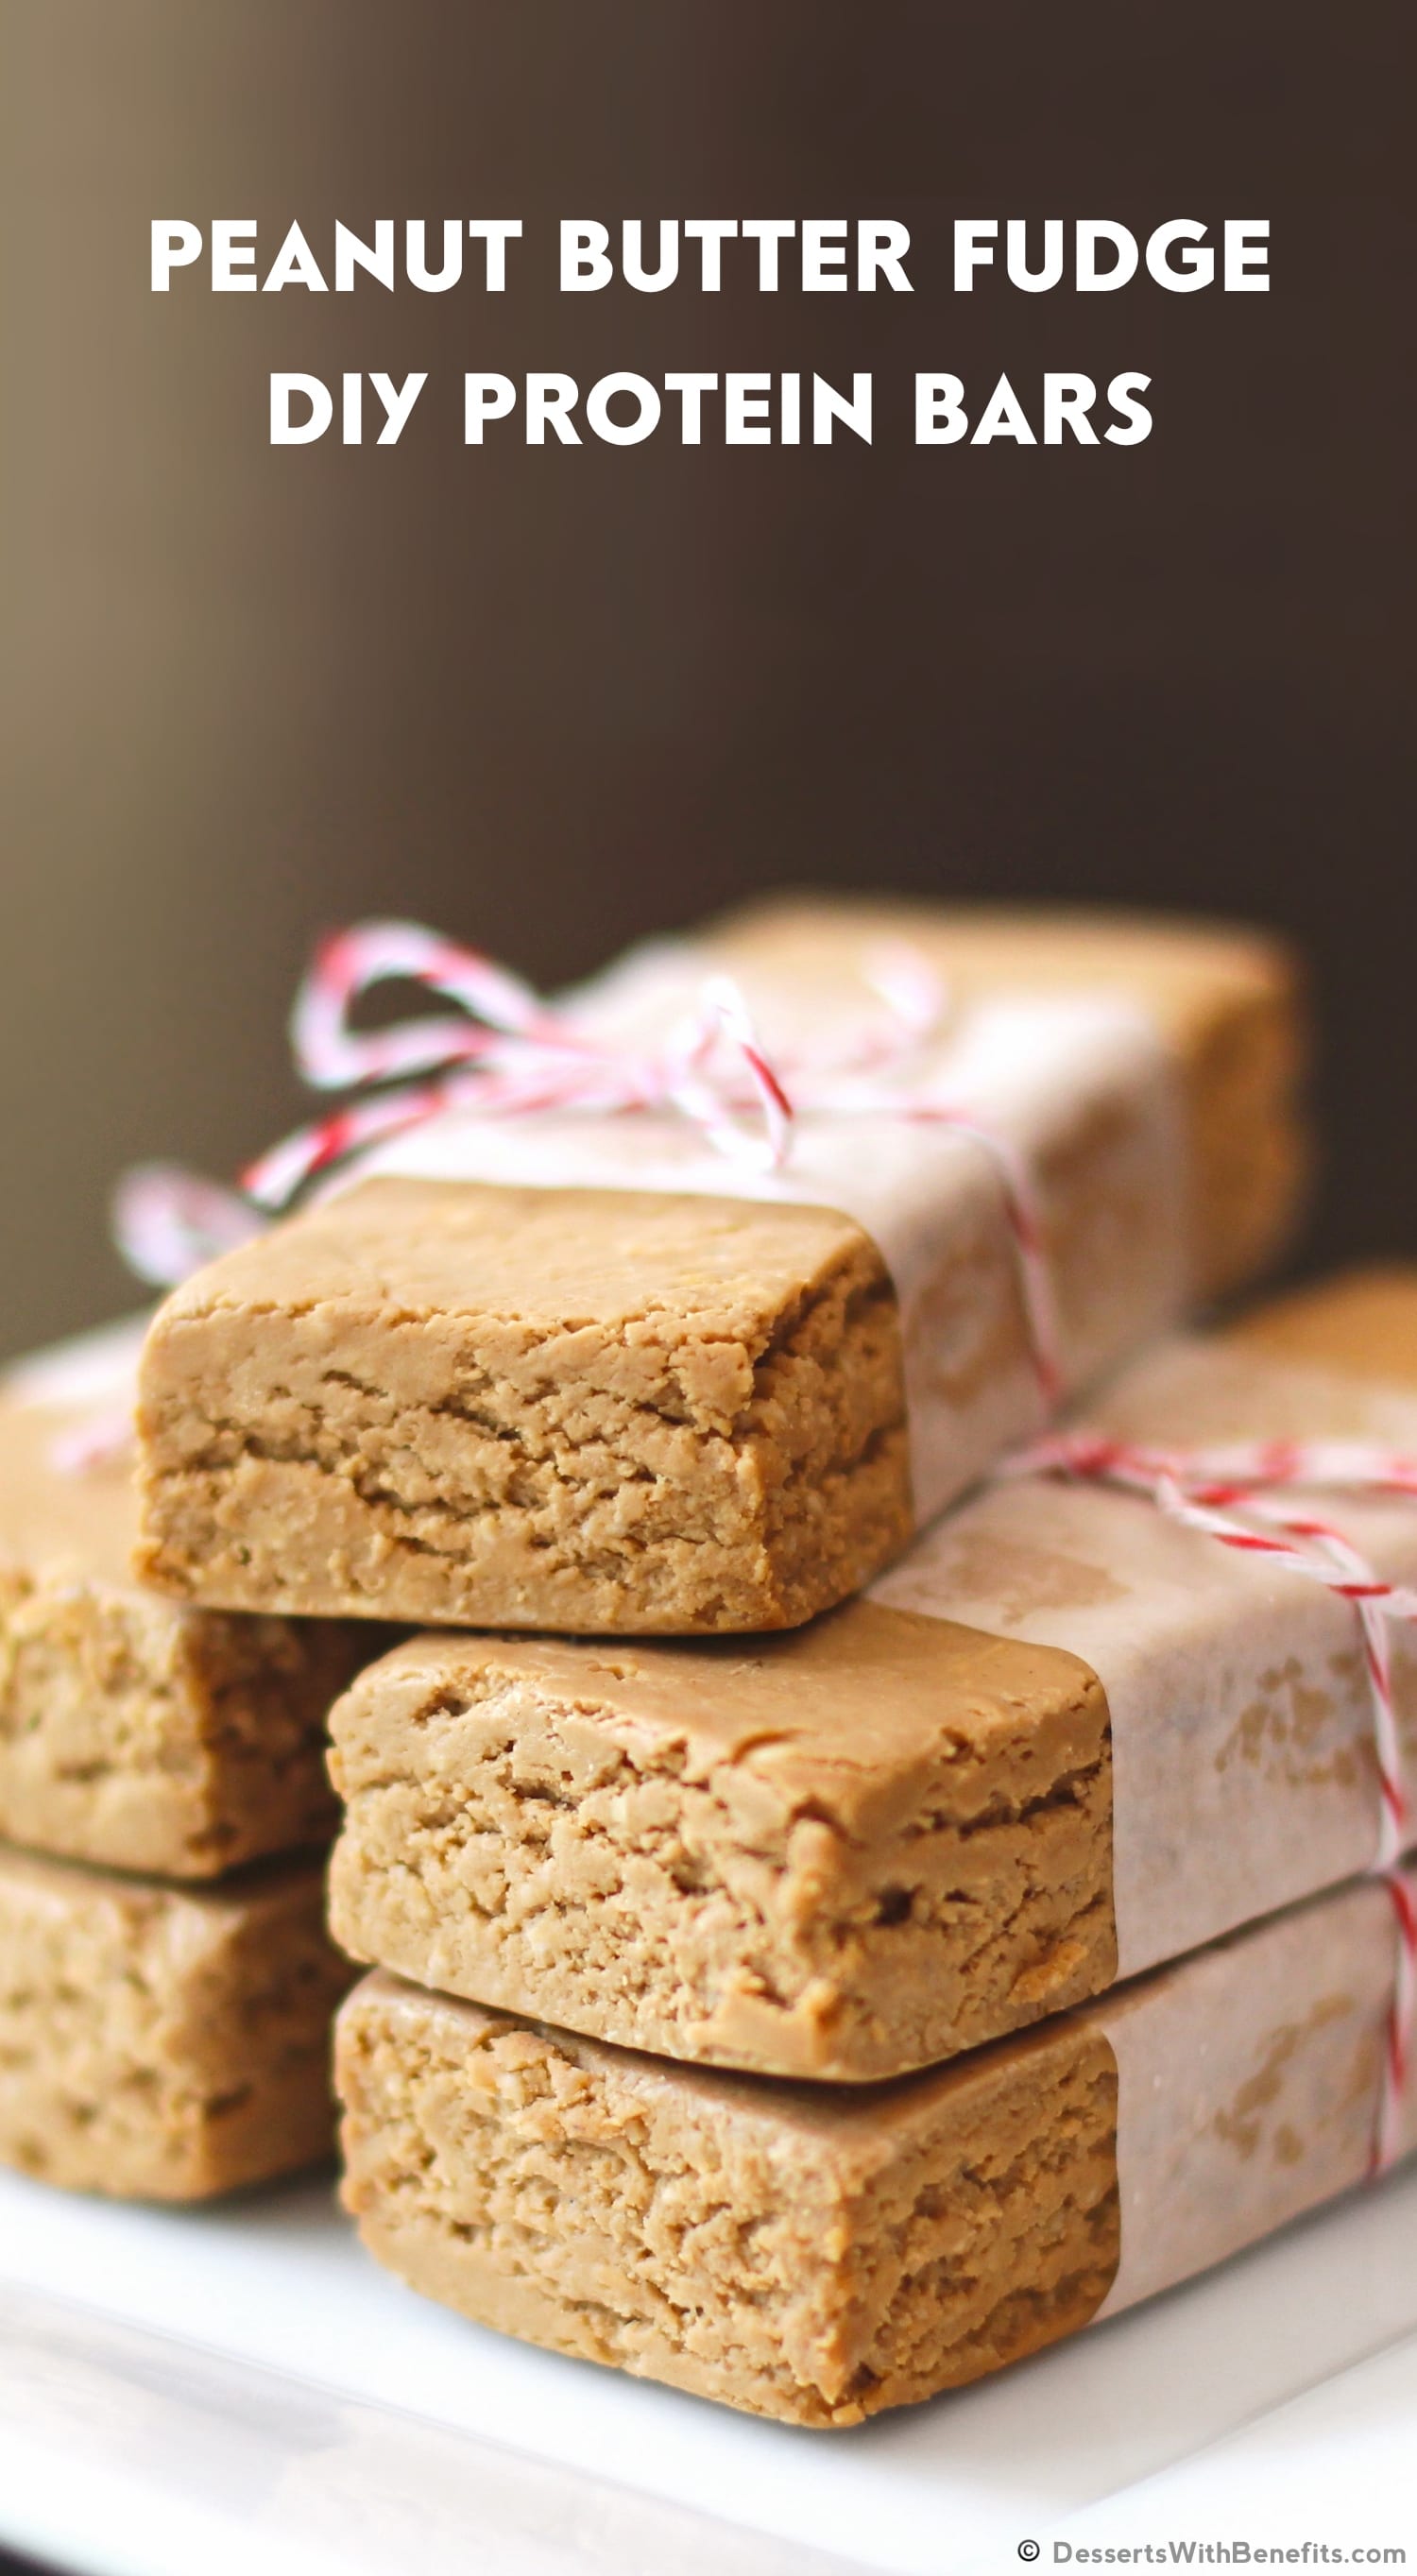 Healthy Peanut Butter DIY Protein Bars from the DIY Protein Bars Cookbook (sugar free, low carb, high protein, high fiber, gluten free, dairy free, vegan)